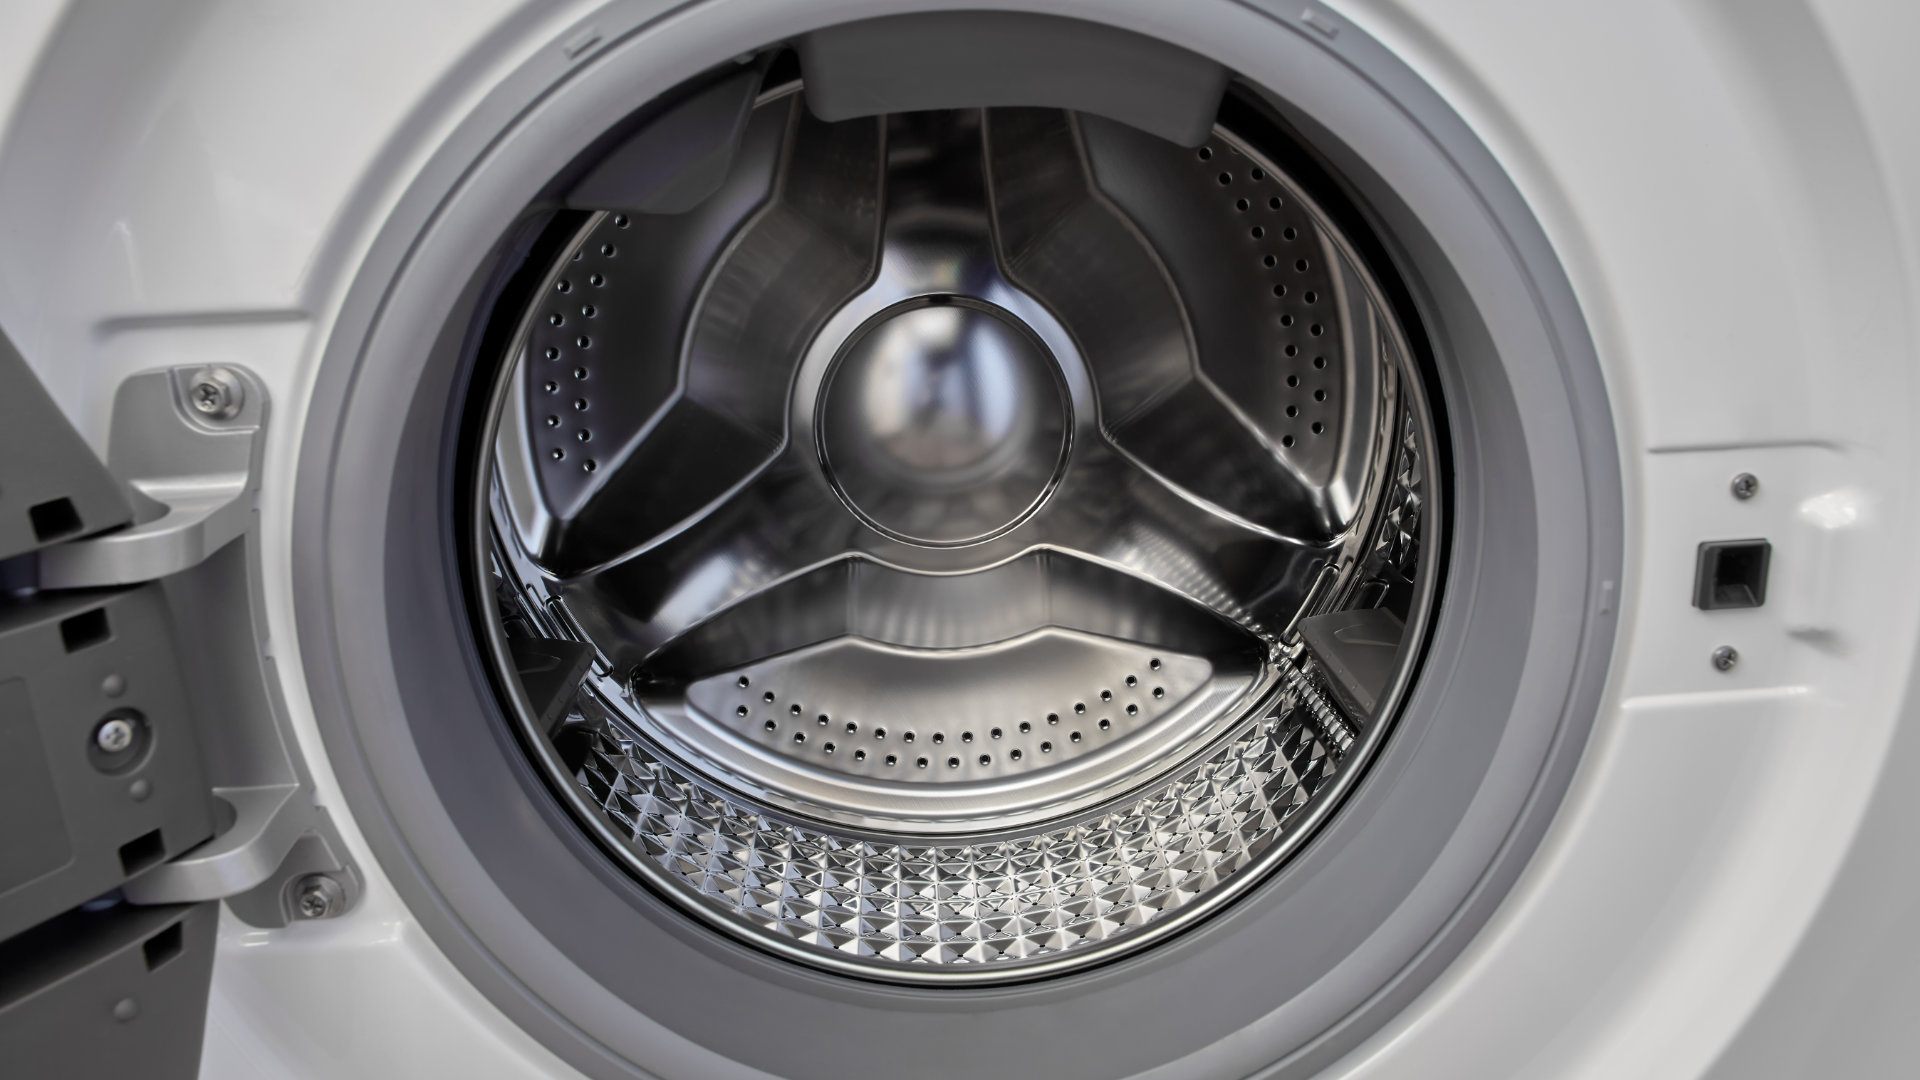 Featured image for “Maytag Washer Not Spinning? Here’s How to Fix It”